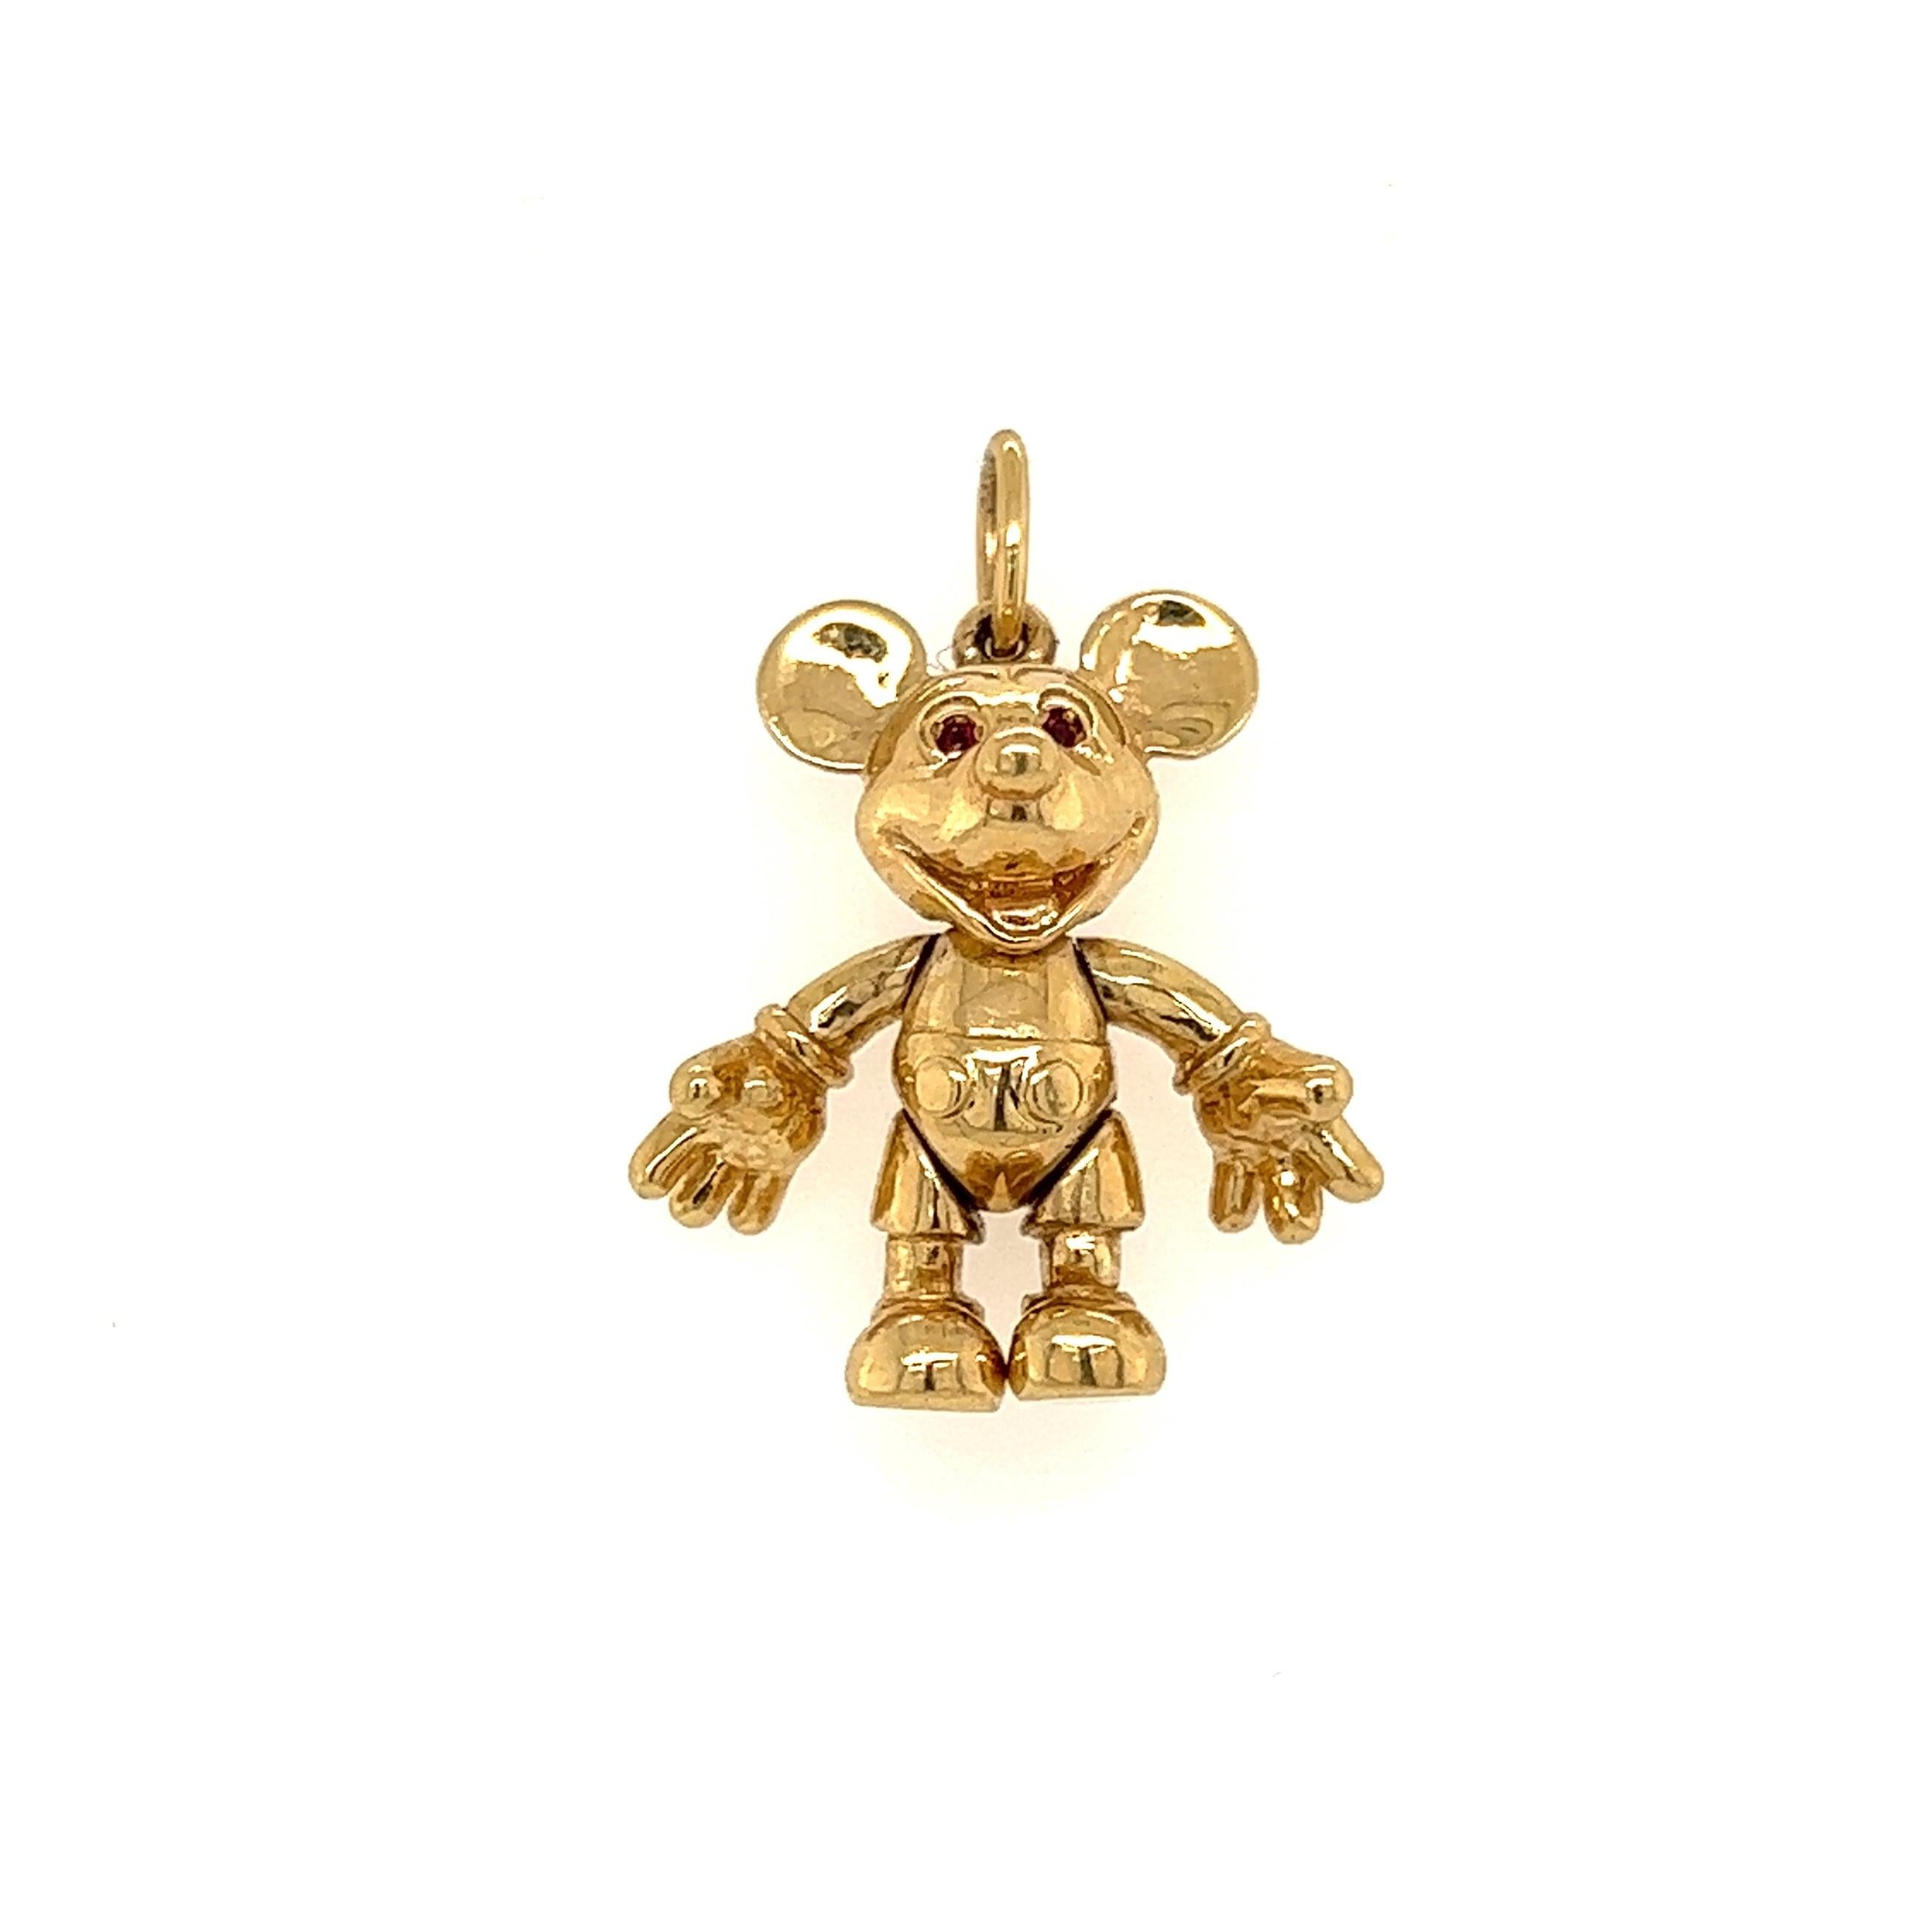 Delightful and Finely Detailed Walt Disney Articulated Mickey Mouse Charm Pendant. Hand crafted Ruby eyes. Hand crafted in 14K Yellow Gold. Measuring approx. 1.10” l x 0.80